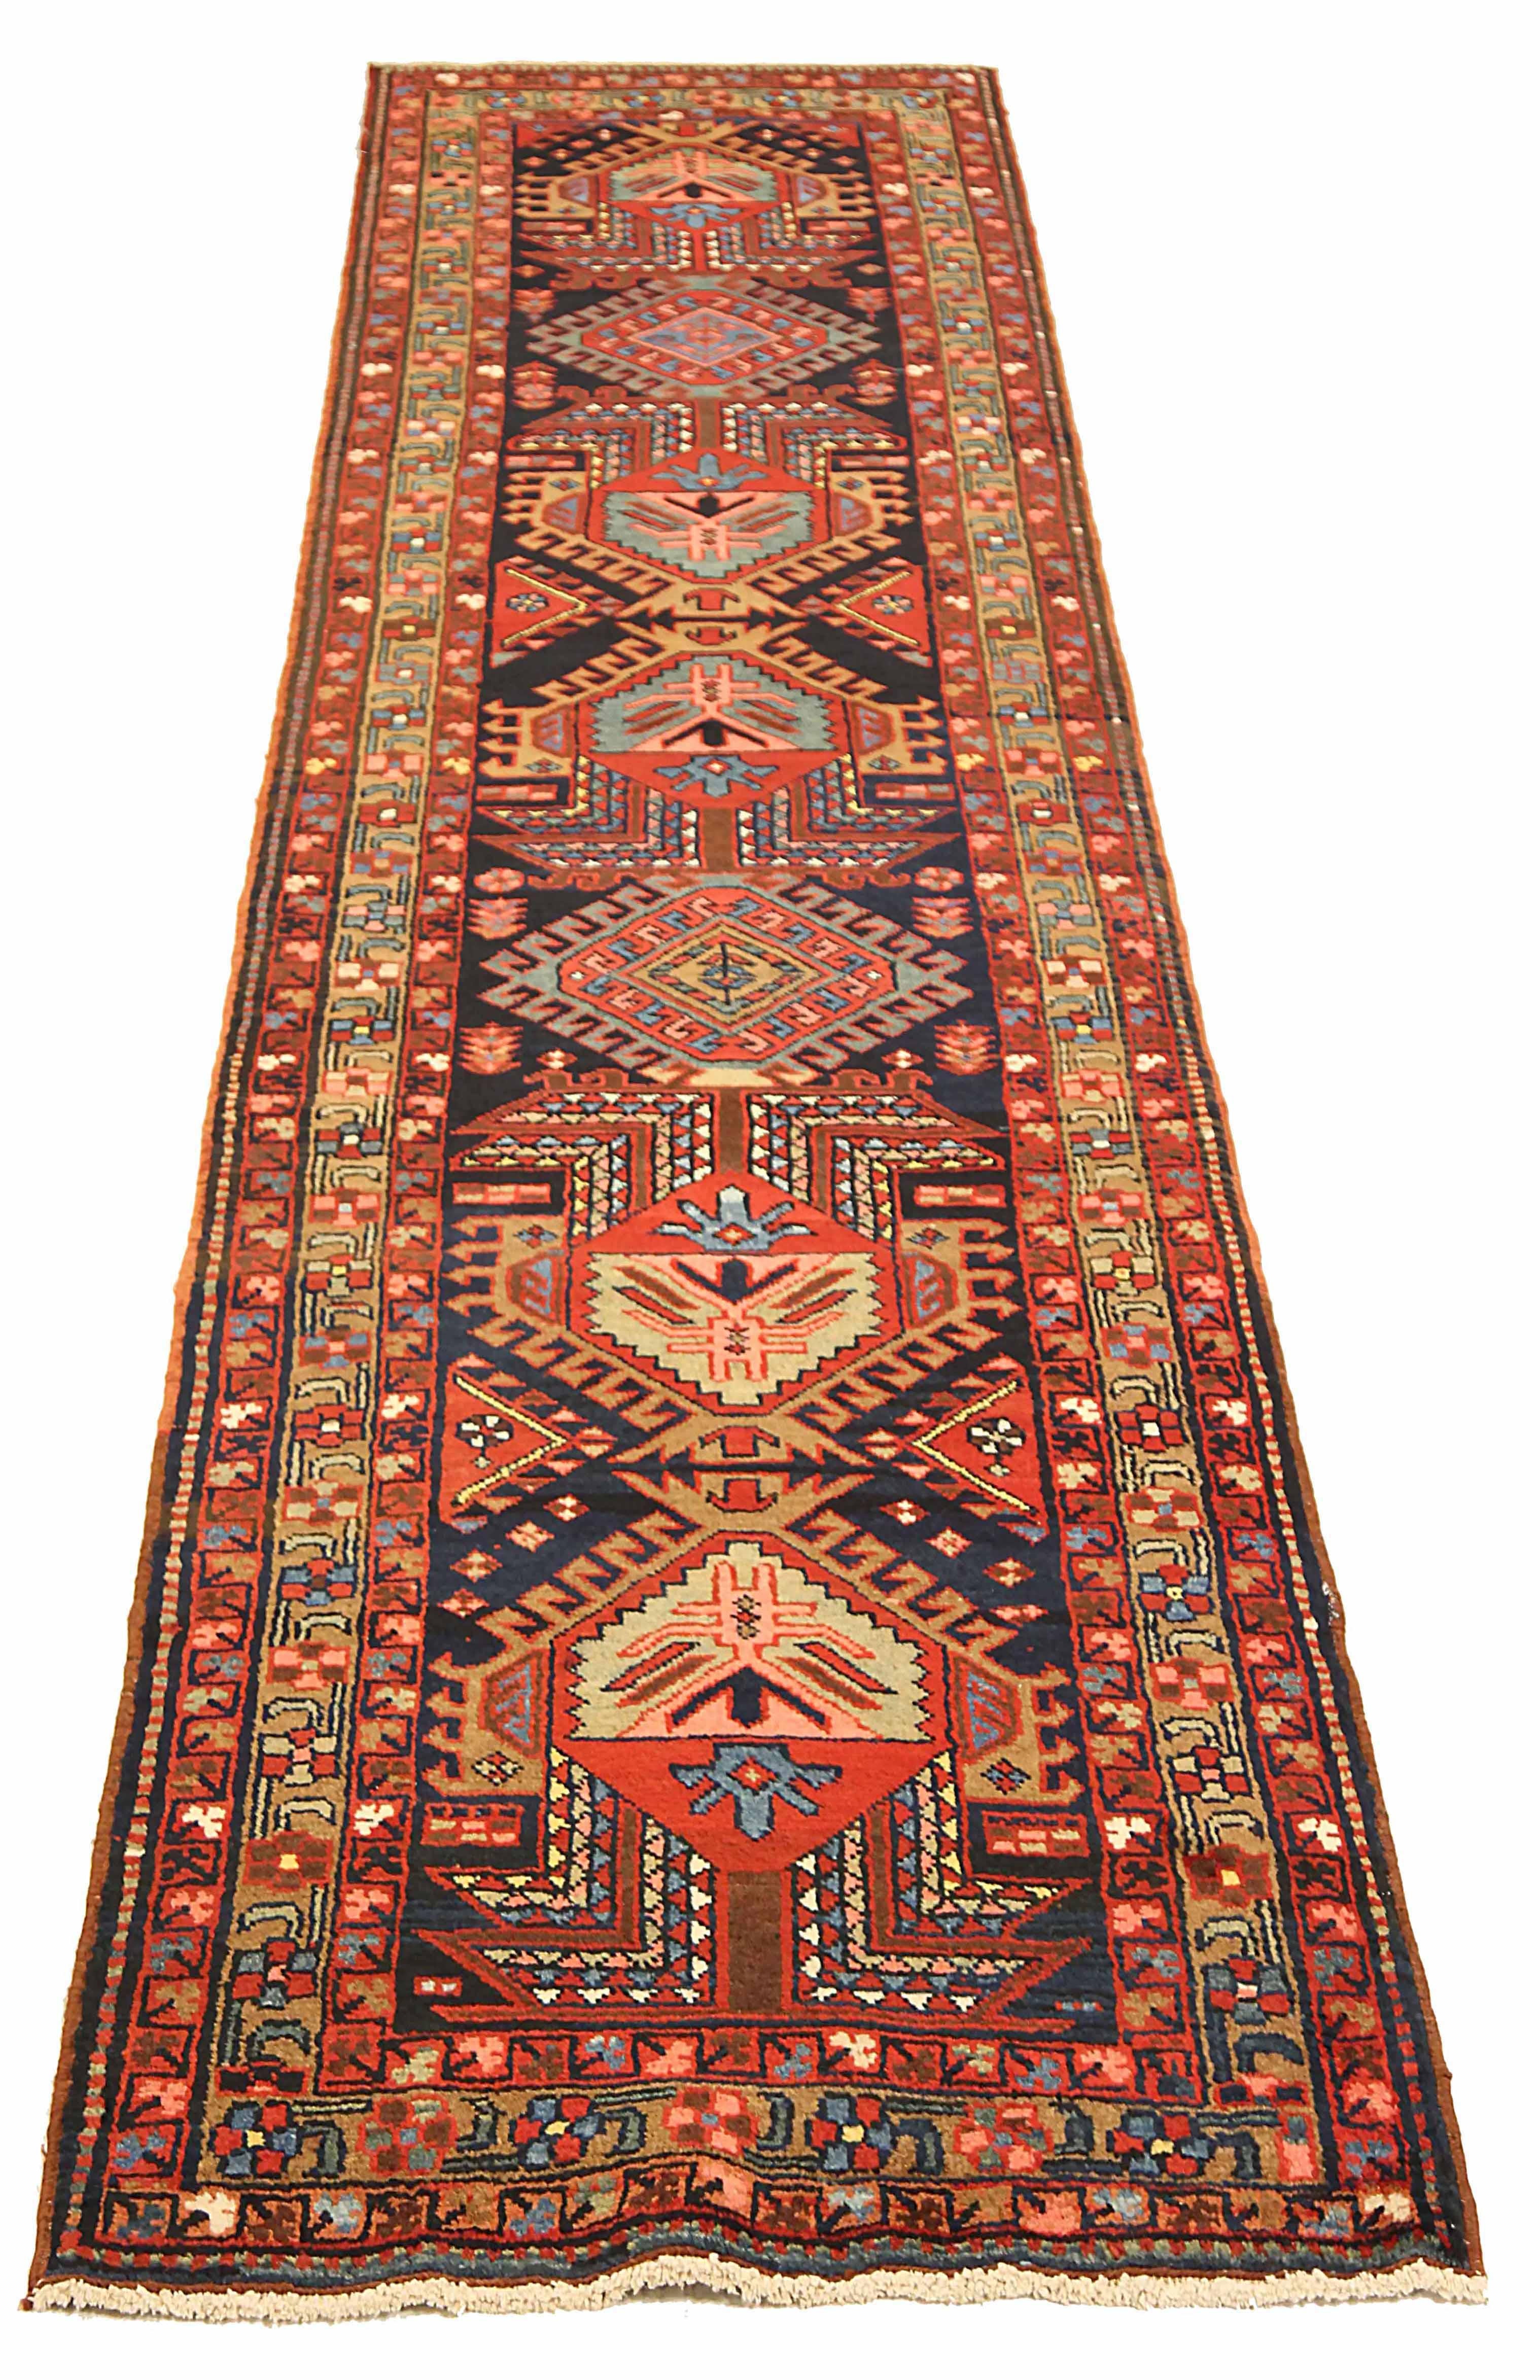 Antique Russian runner rug handwoven from the finest sheep’s wool. It’s colored with all-natural vegetable dyes that are safe for humans and pets. It’s a traditional Saison design handwoven by expert artisans. It’s a lovely runner rug that can be